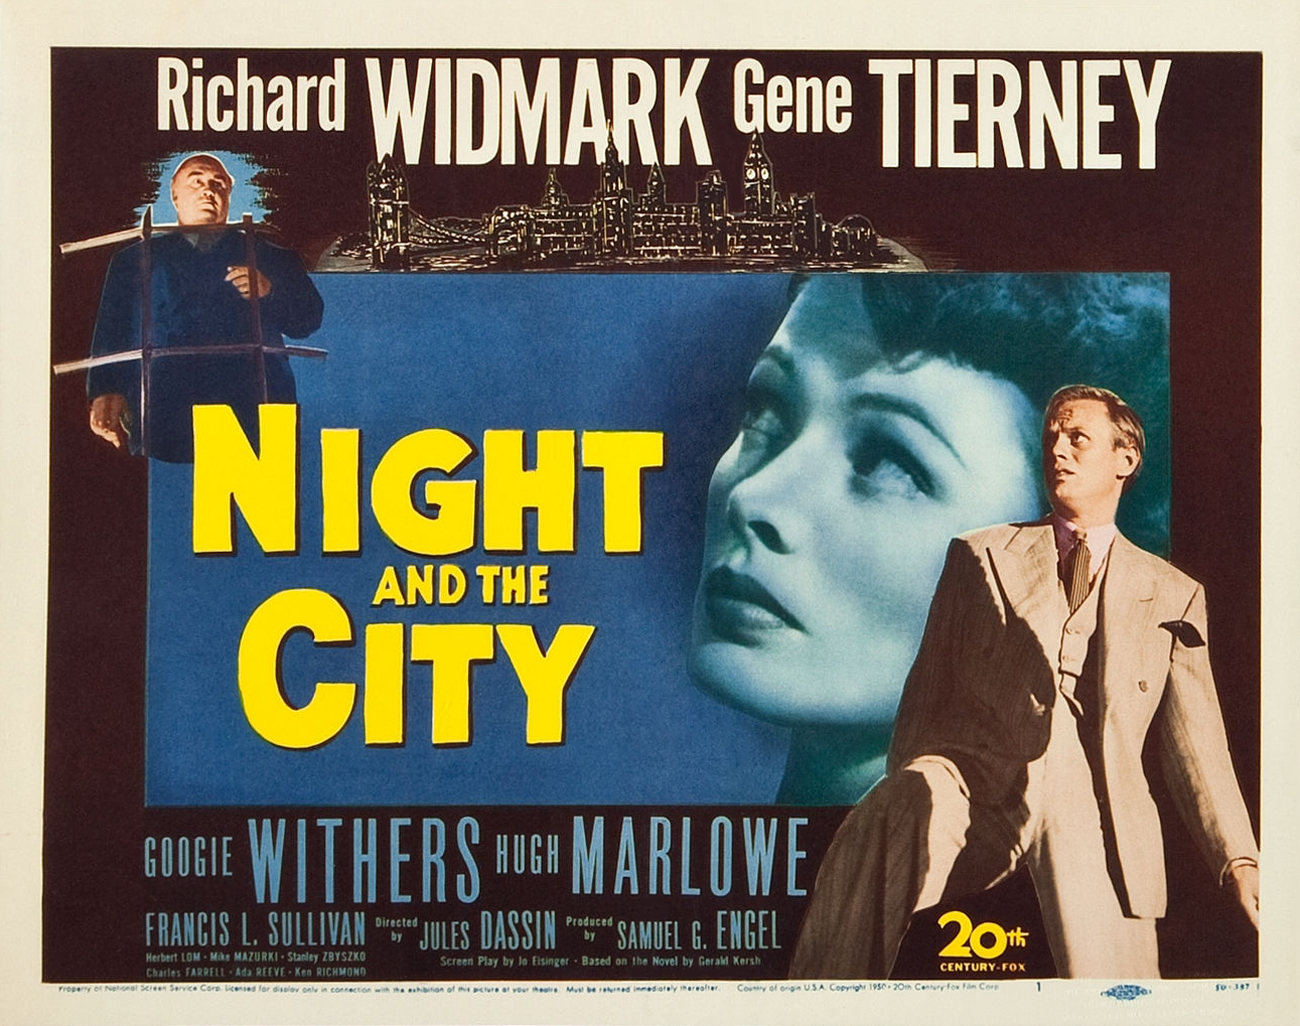 Poster-Night-and-the-City-1950_02.jpg